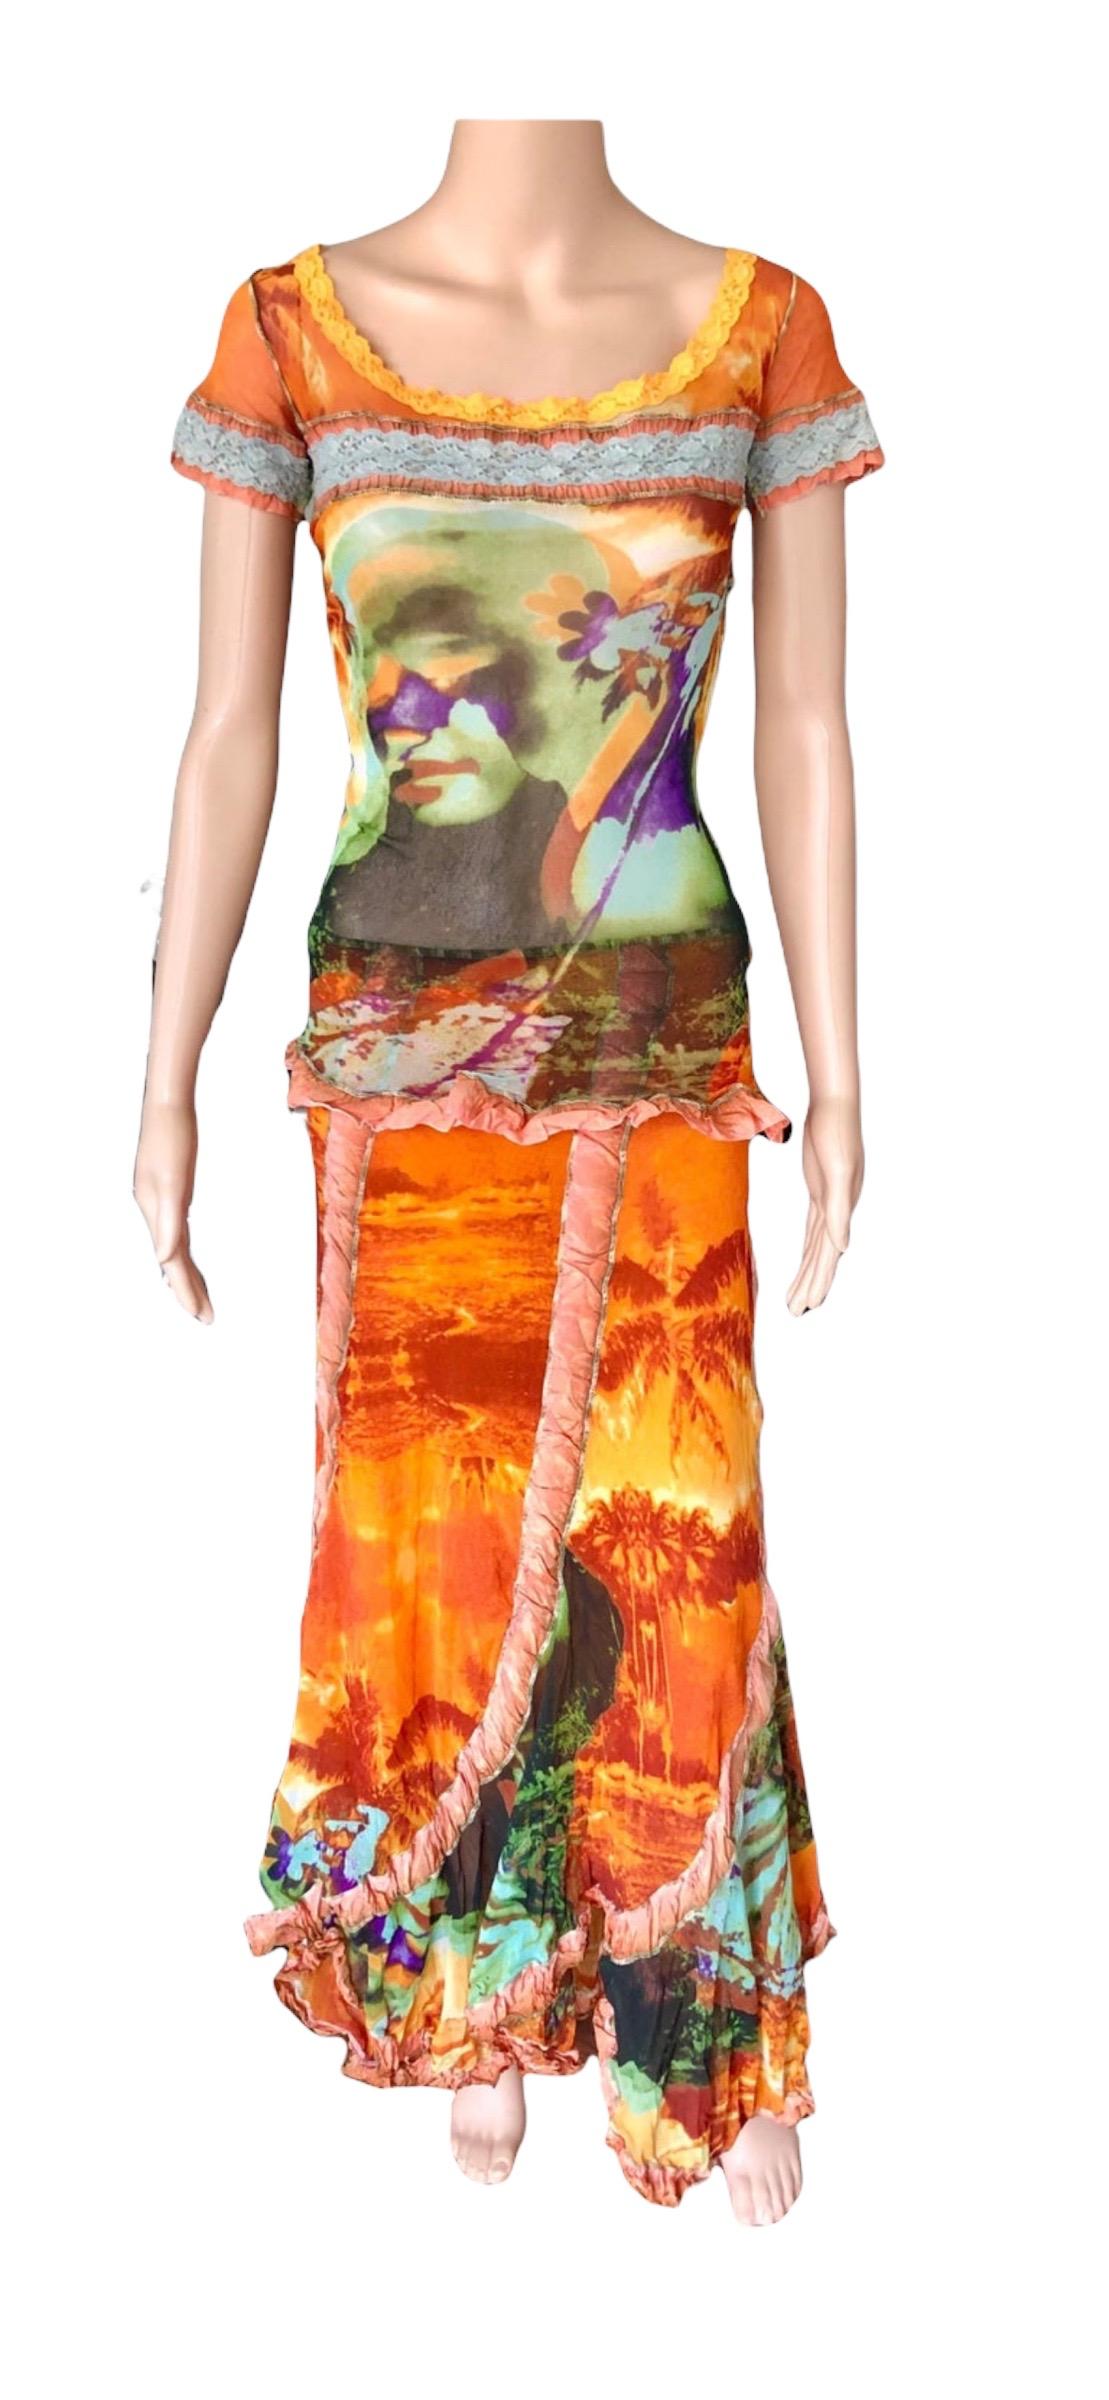 Jean Paul Gaultier S/S 2000 Abstract Psychedelic Top &Skirt Ensemble 2 Piece Set For Sale 8